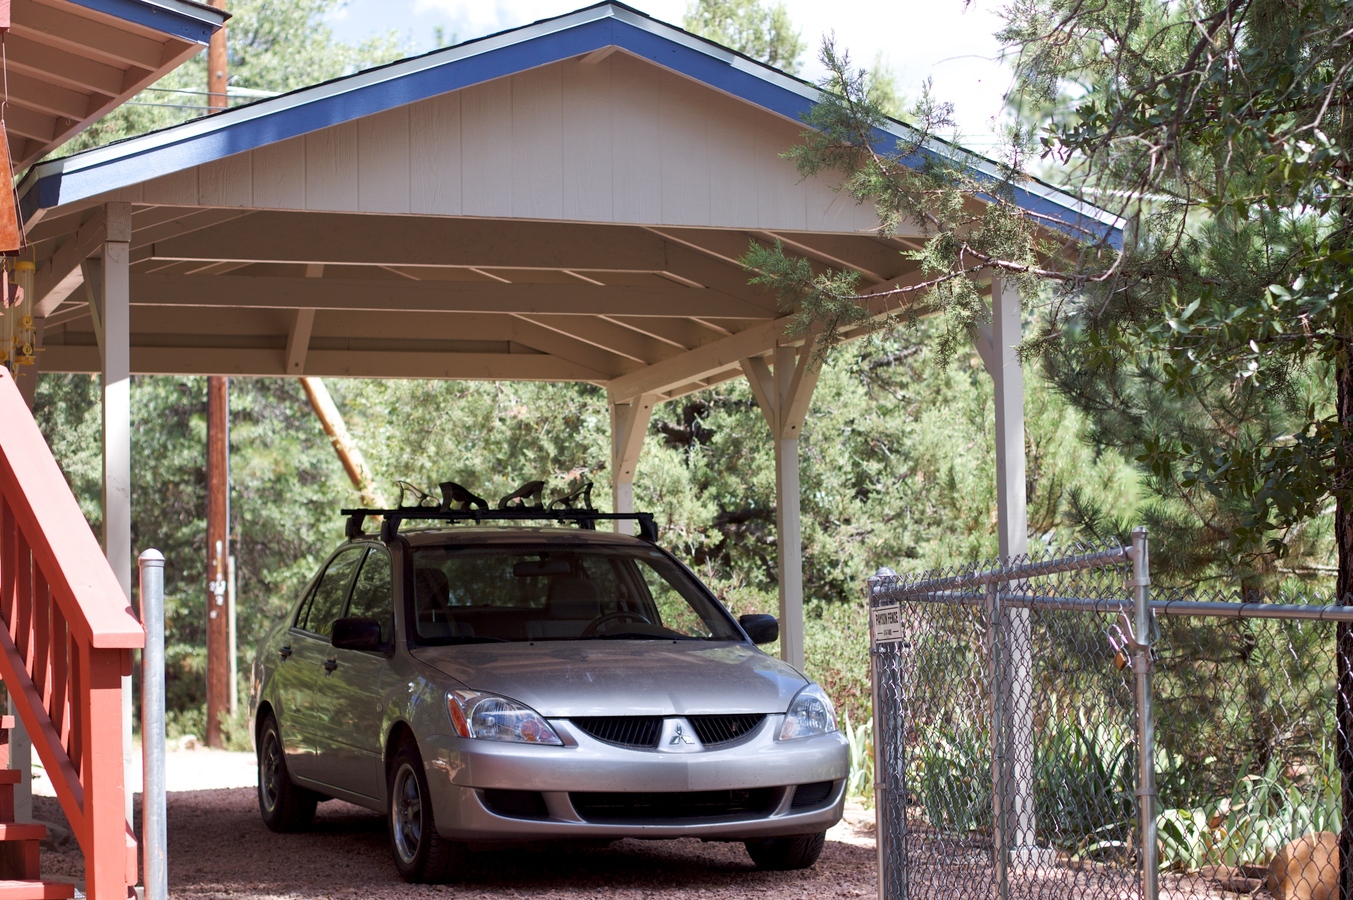 outdoor-carport-enhance-homes-value-functionality:add-value-to-your-home